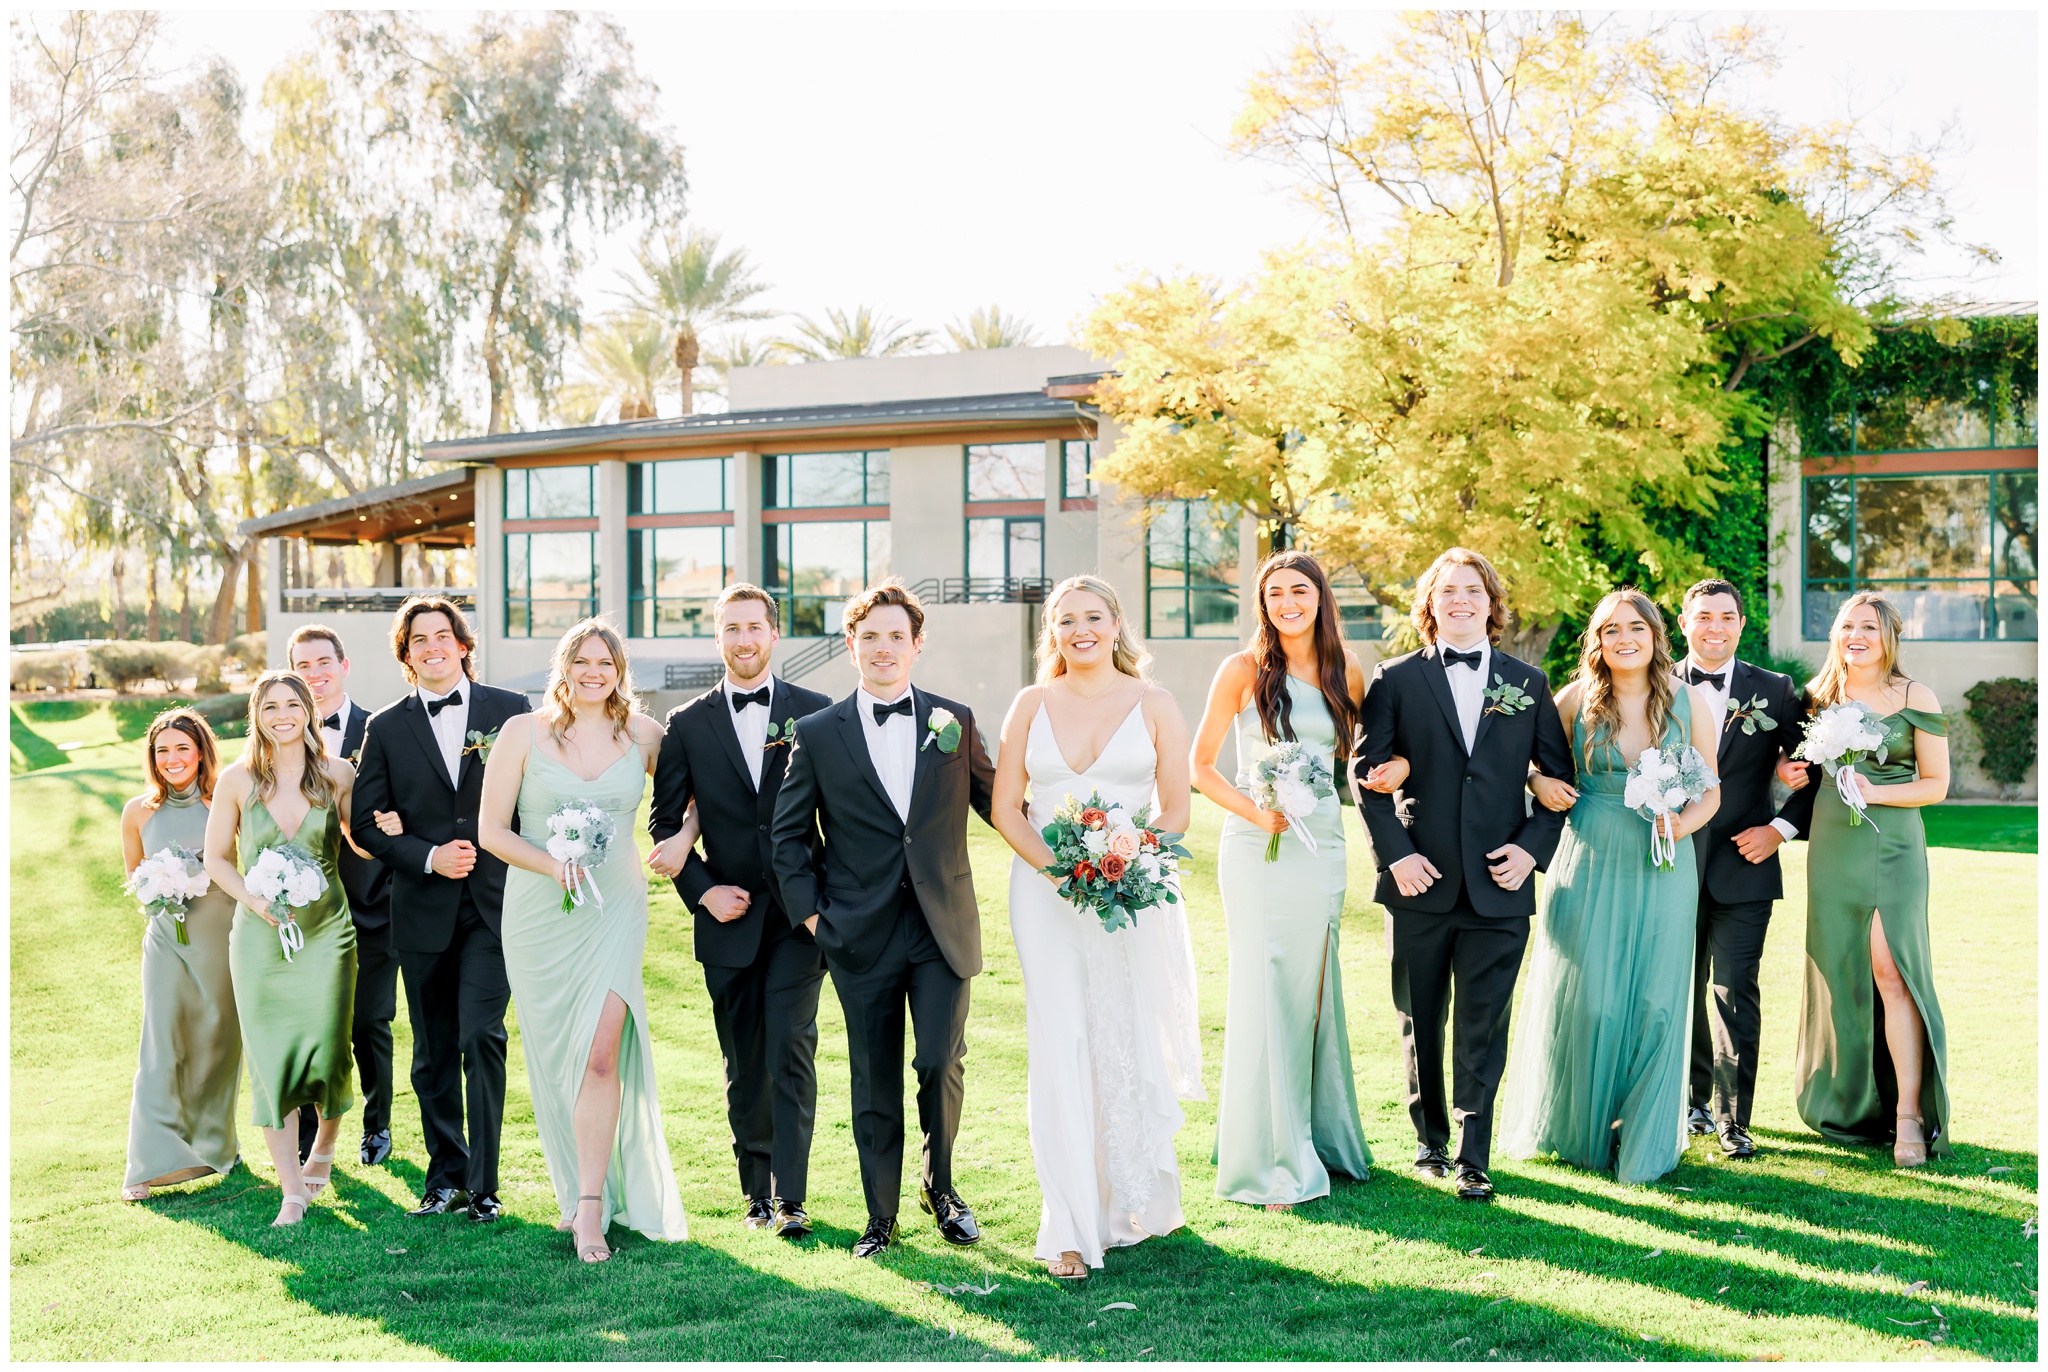 Full wedding party pictures at Gainey ranch